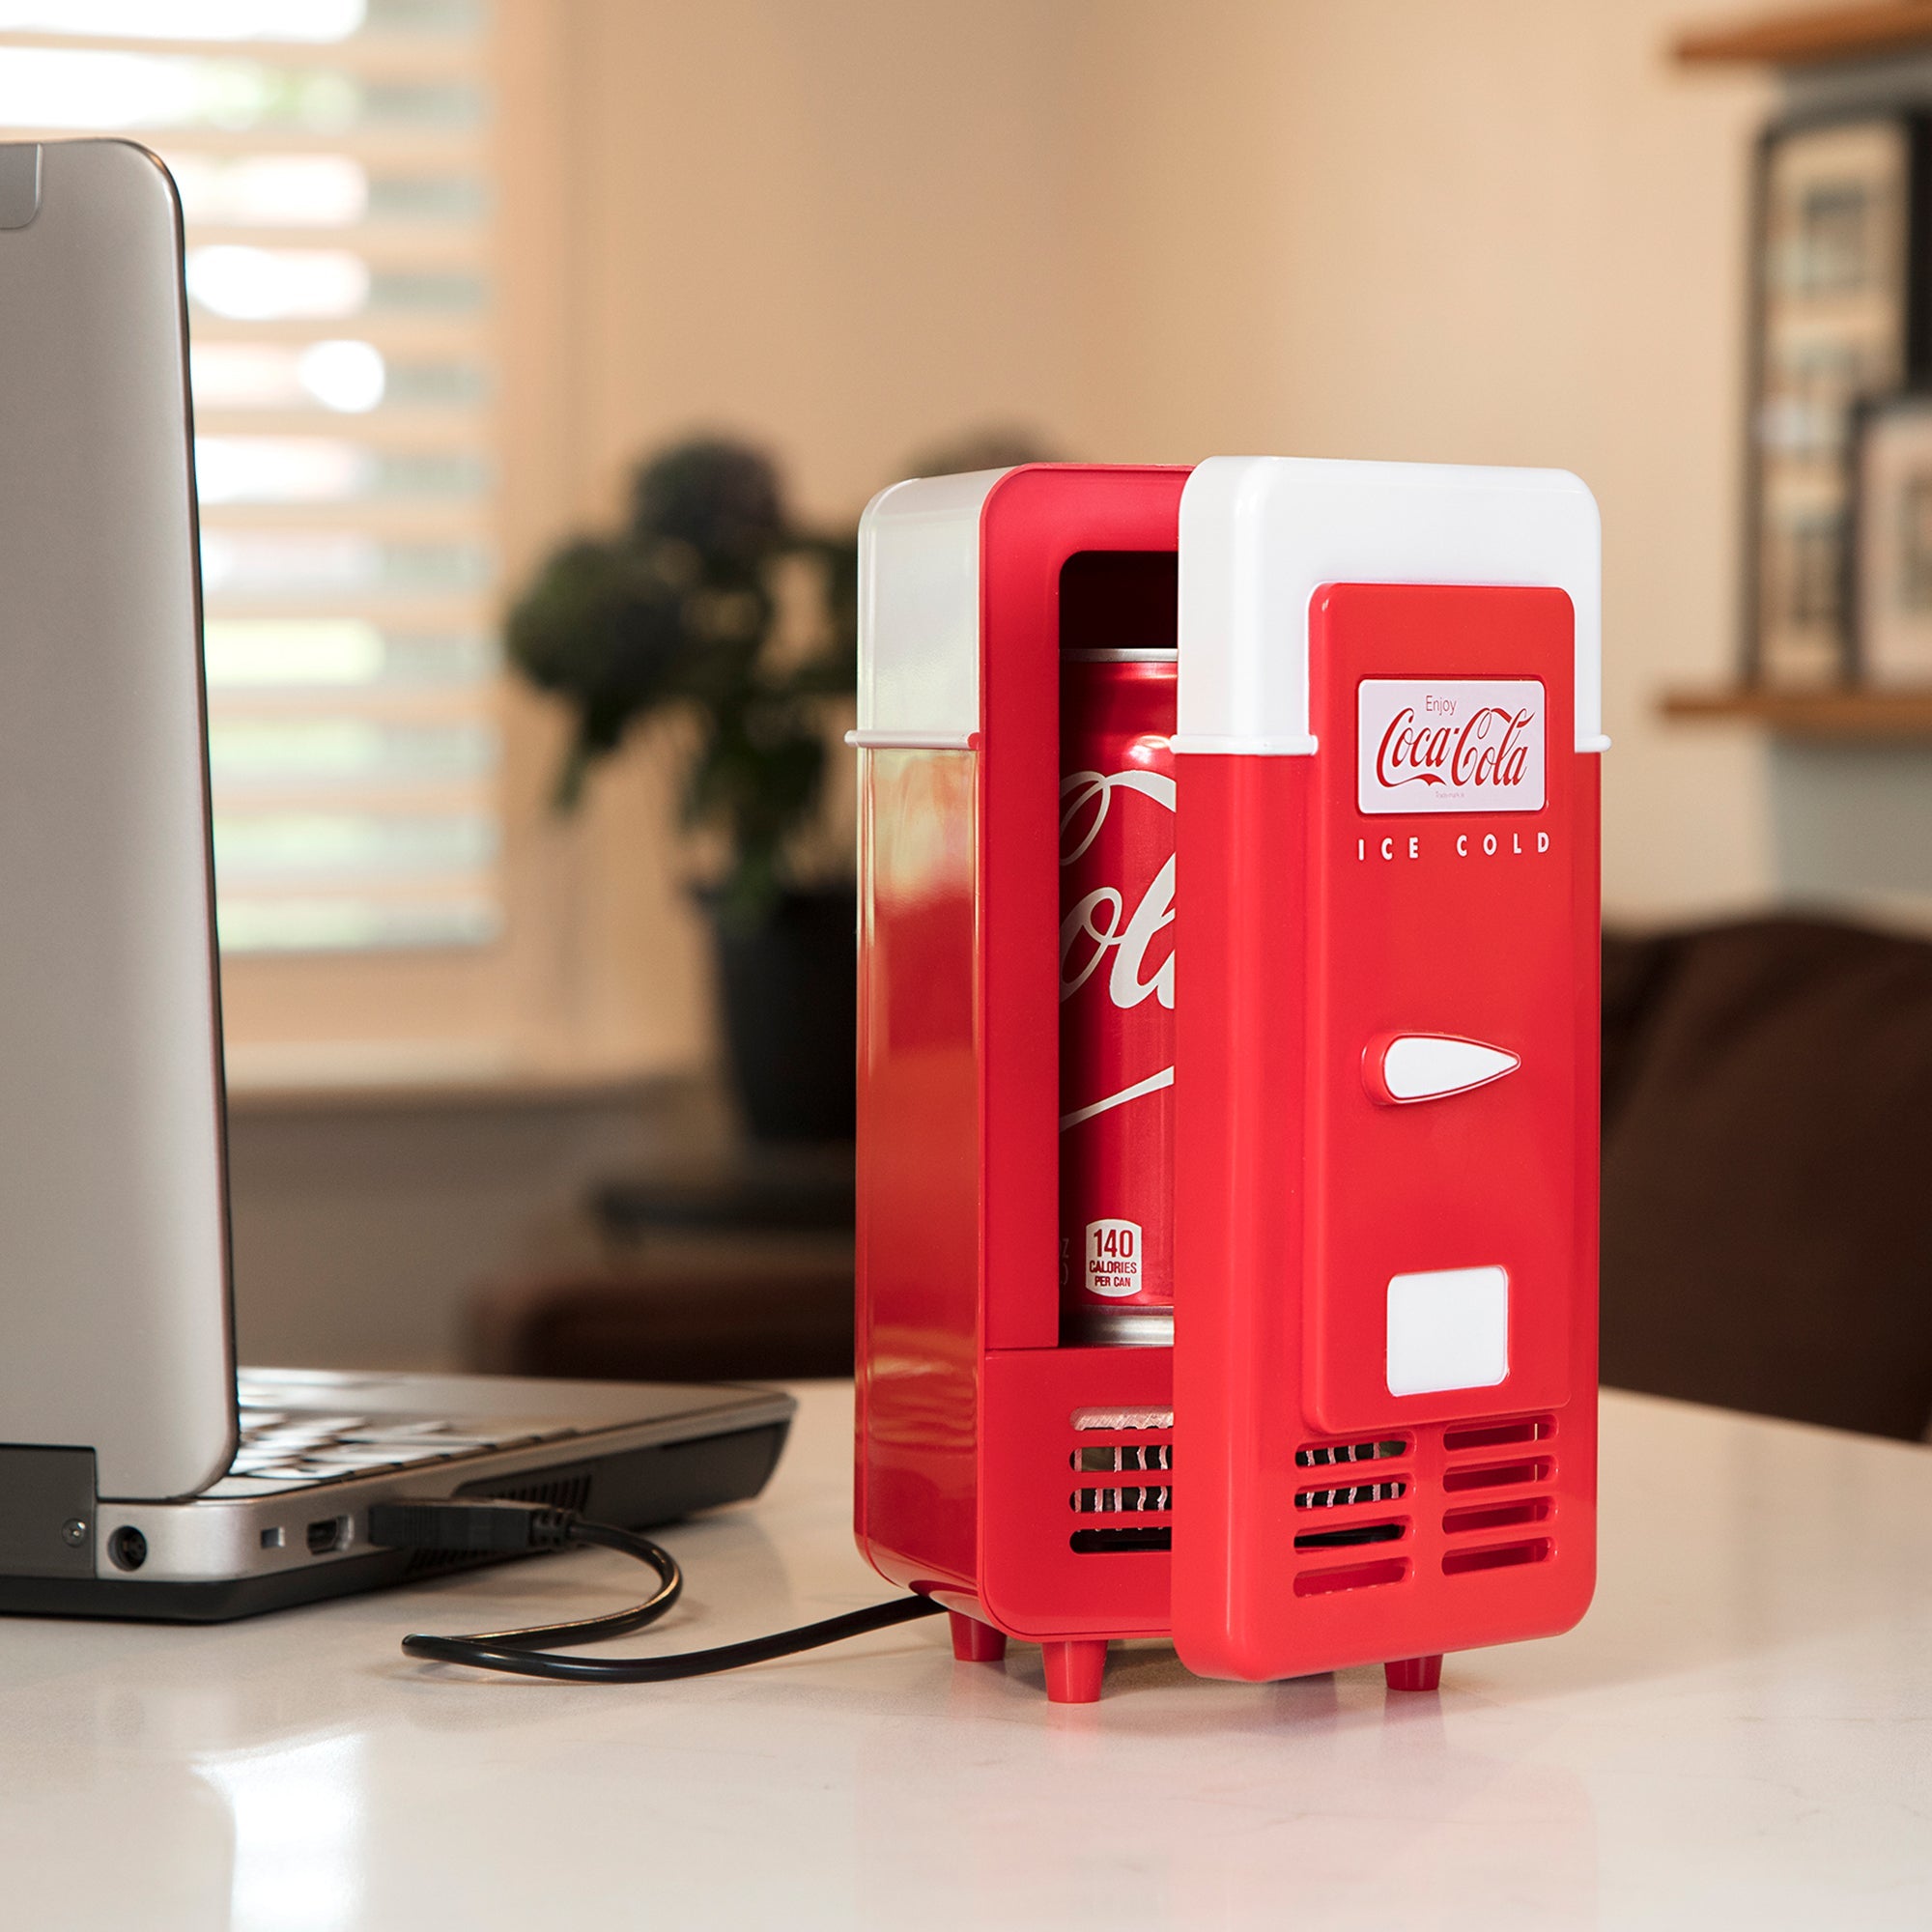 Lifestyle image of Coca-Cola single can USB cooler plugged into a silver-gray laptop computer on a light beige desktop. The mini fridge is partly open with a can of Coke visible inside